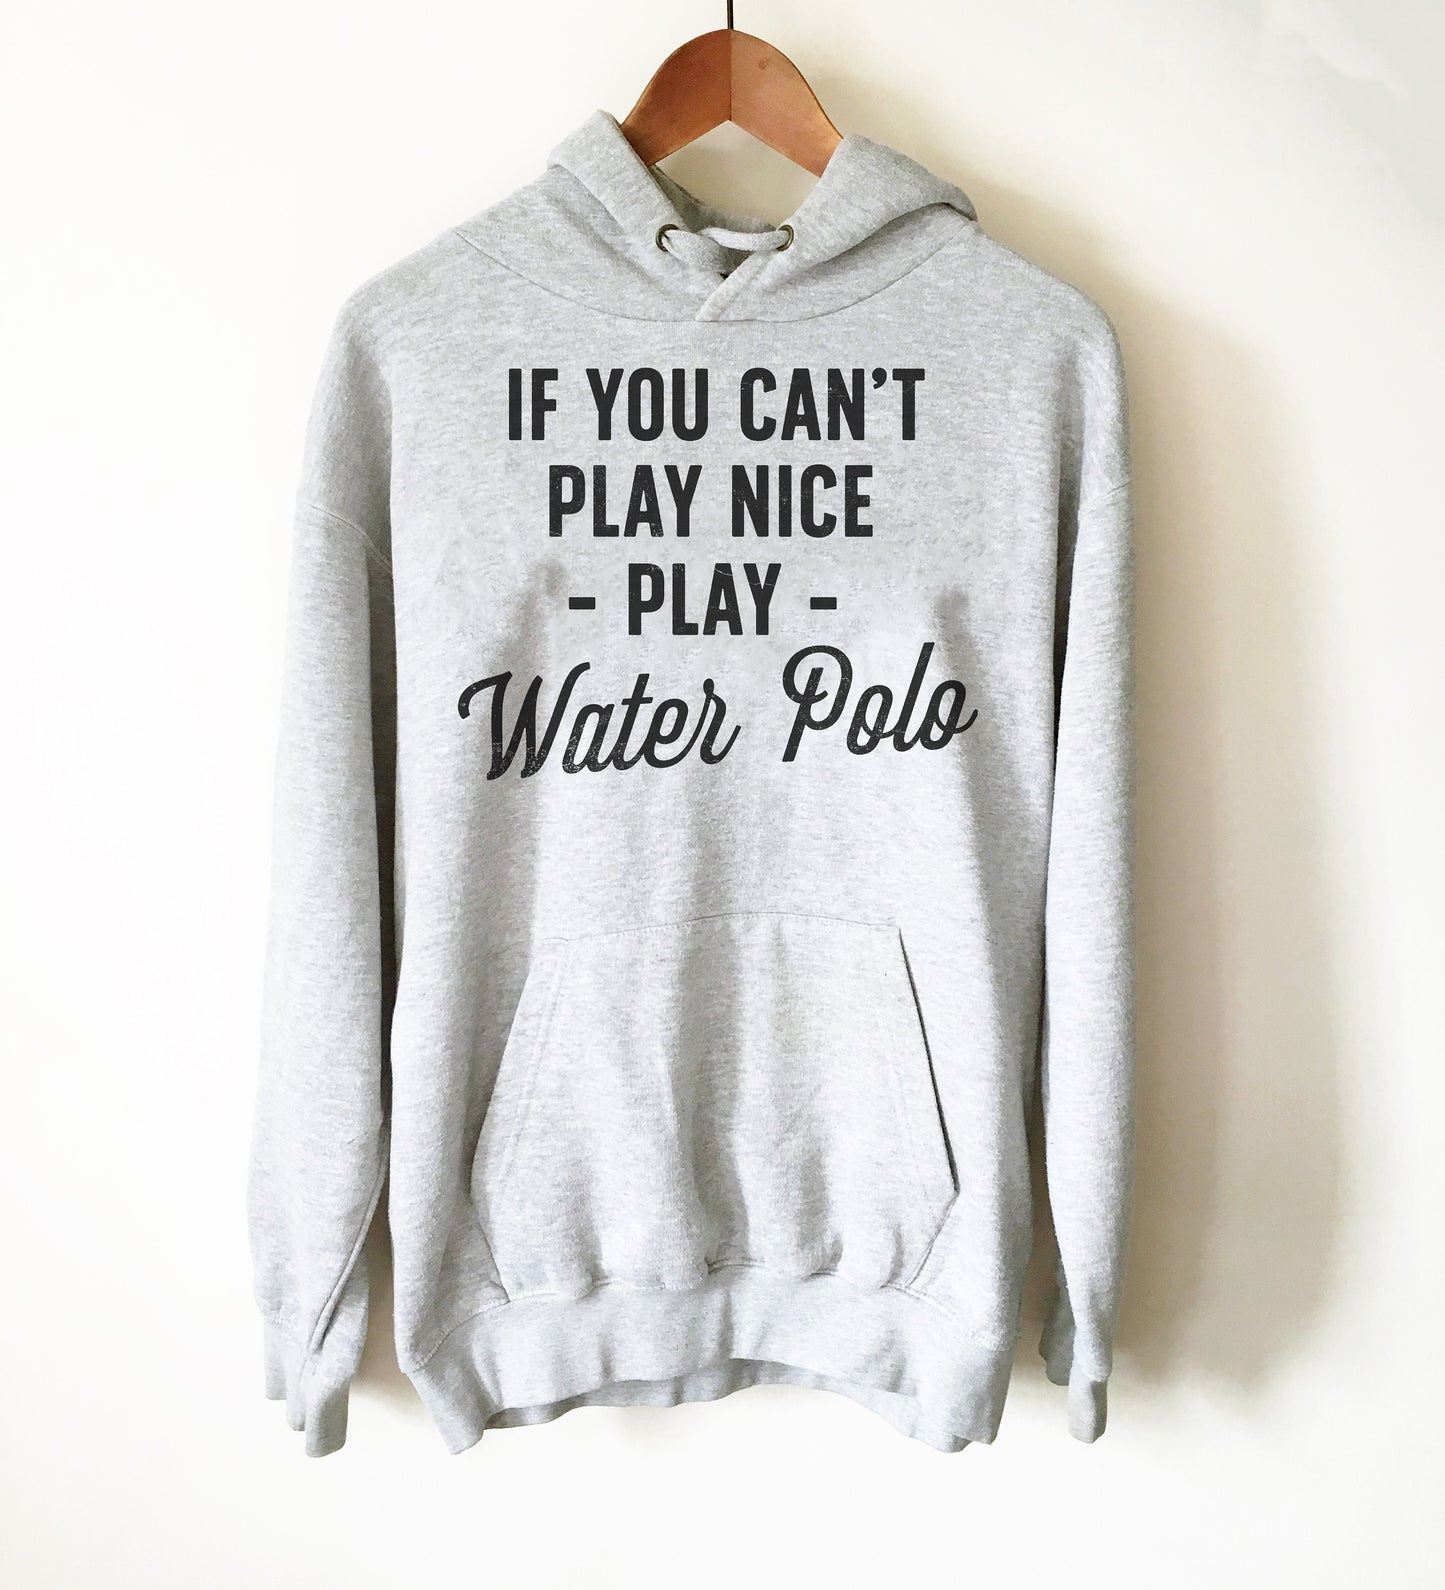 If You Can't Play Nice Play Water Polo Hoodie - Water Polo Shirt, Water Polo Gift, Polo Shirt, Polo Gift, Water Polo Player, Water Polo